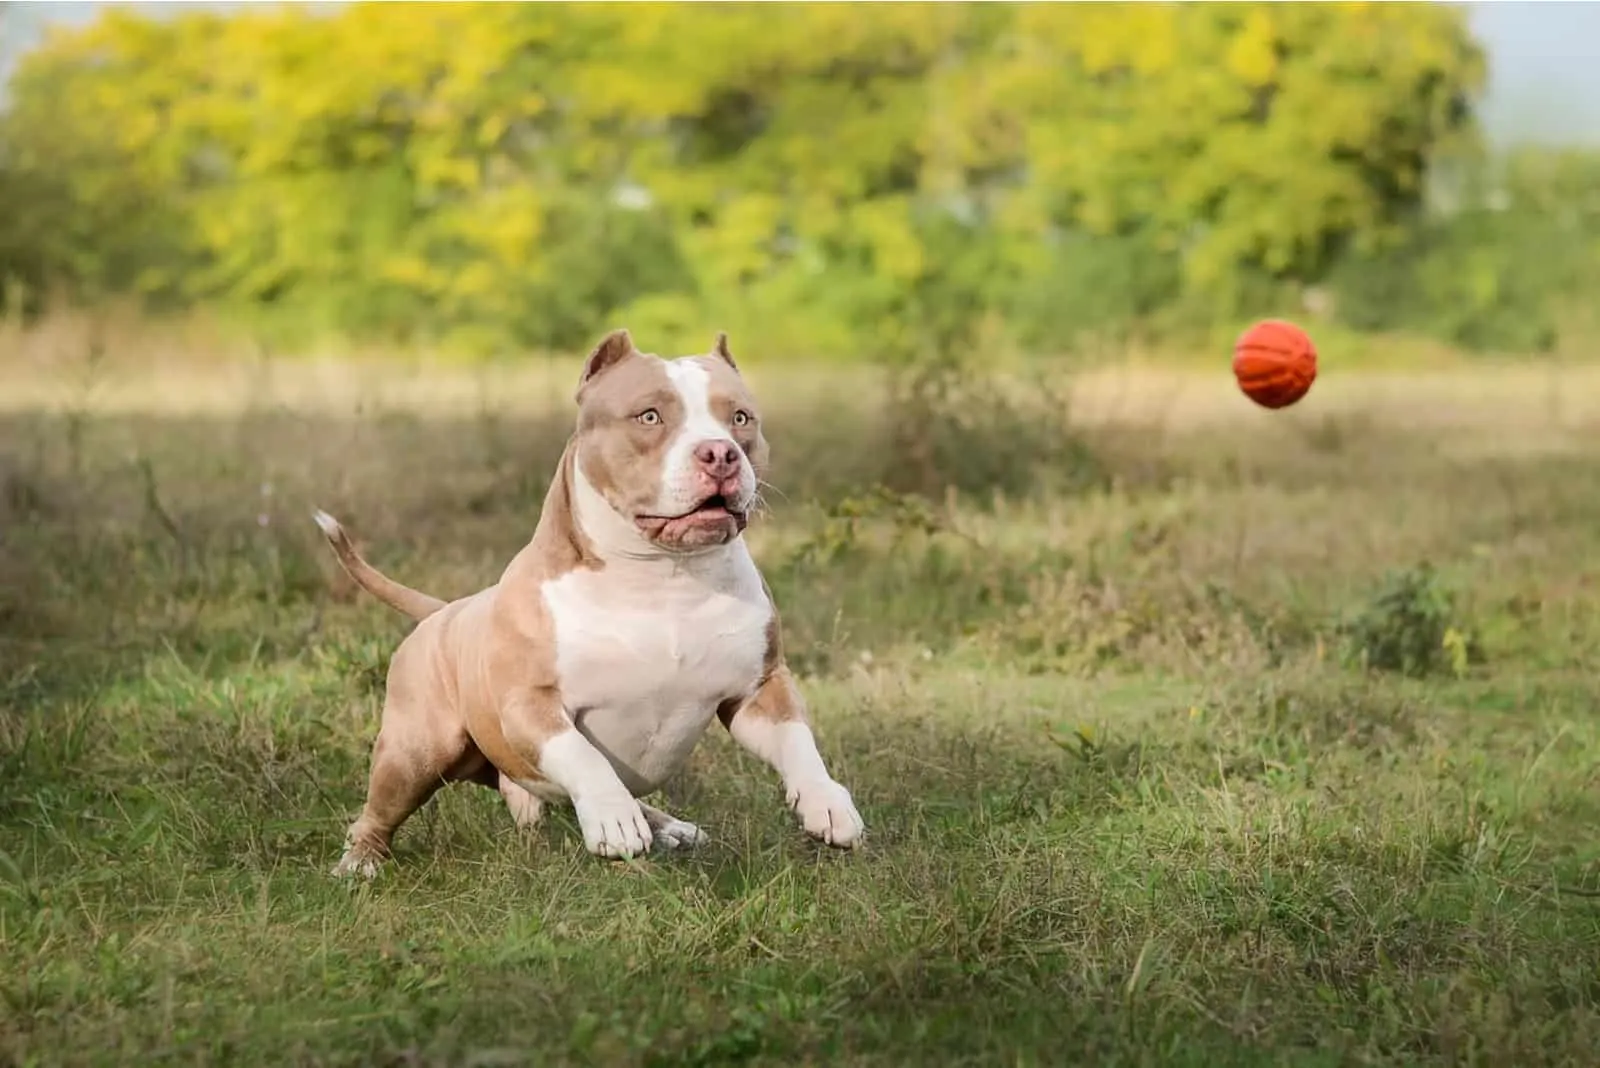 american bully playing with a ball